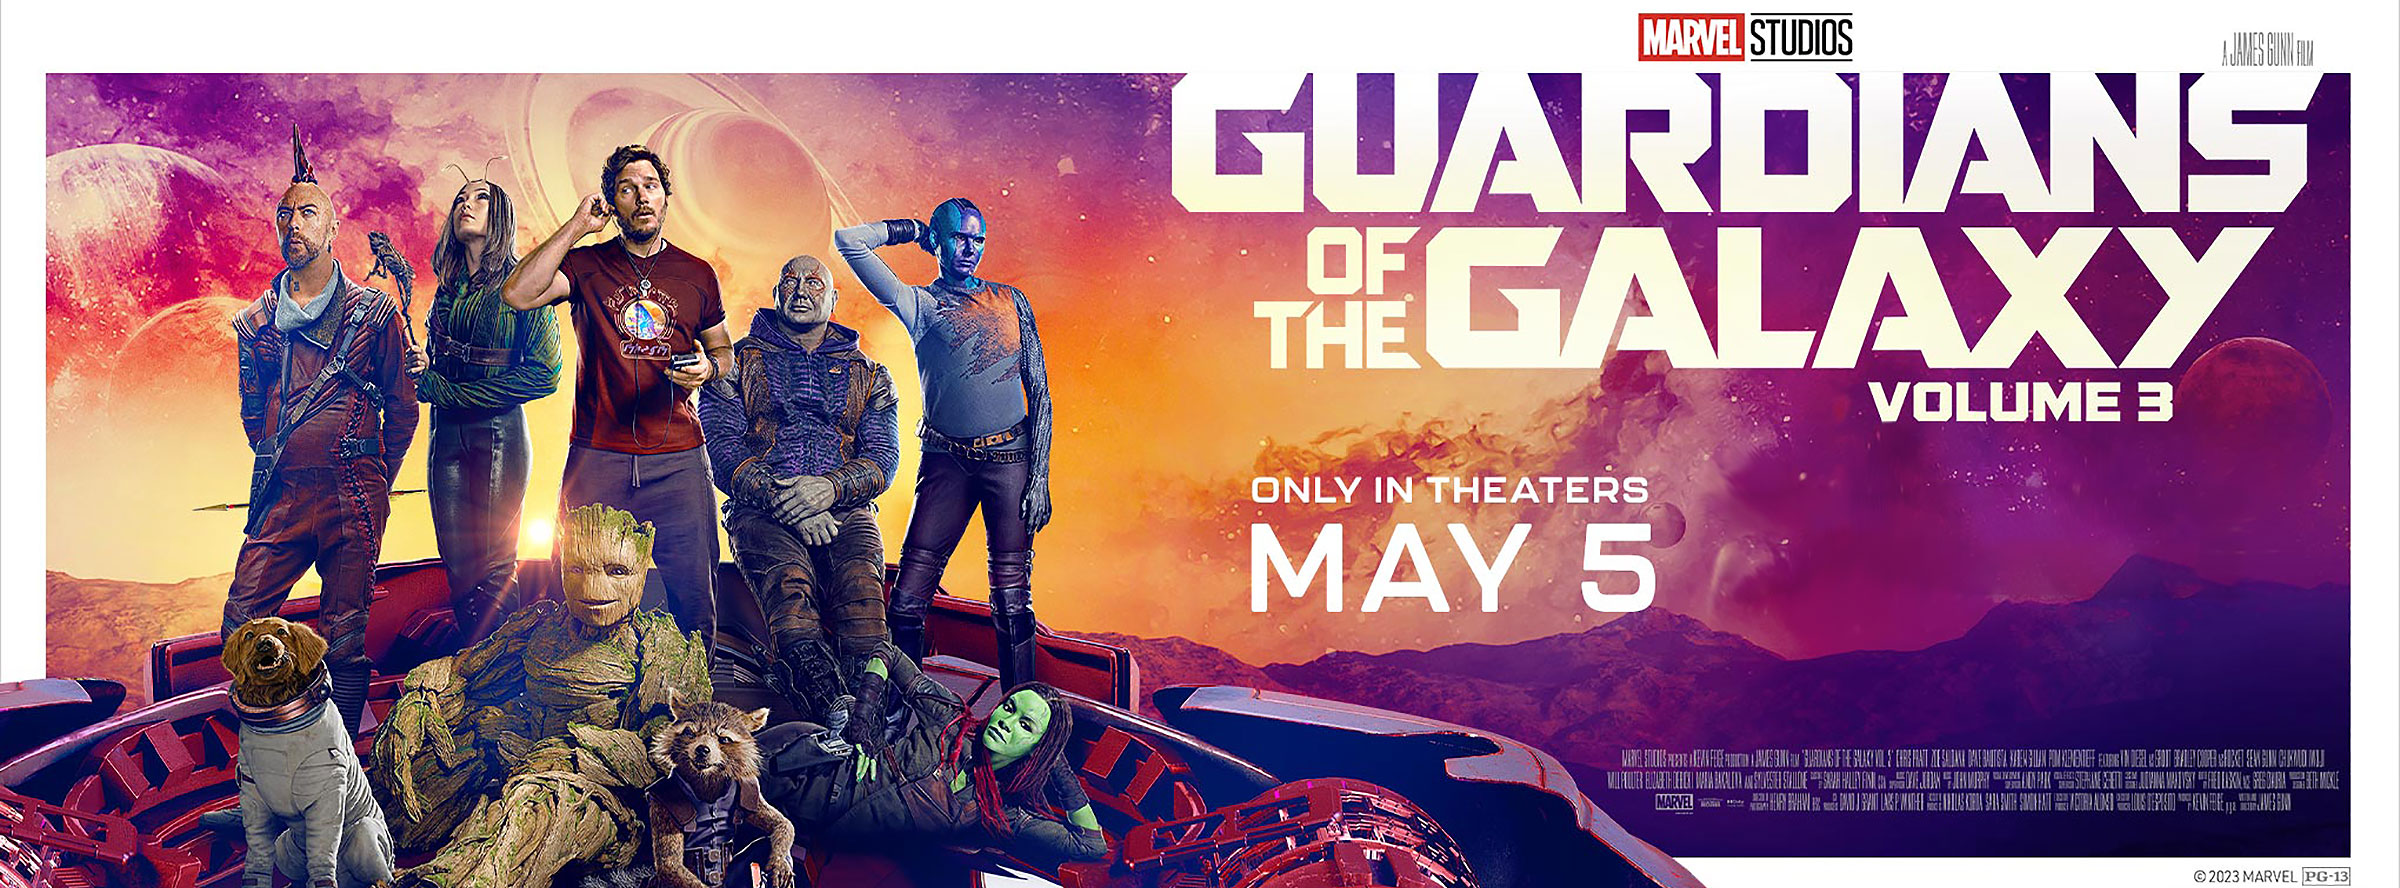 Slider Image for Guardians of the Galaxy Vol. 3